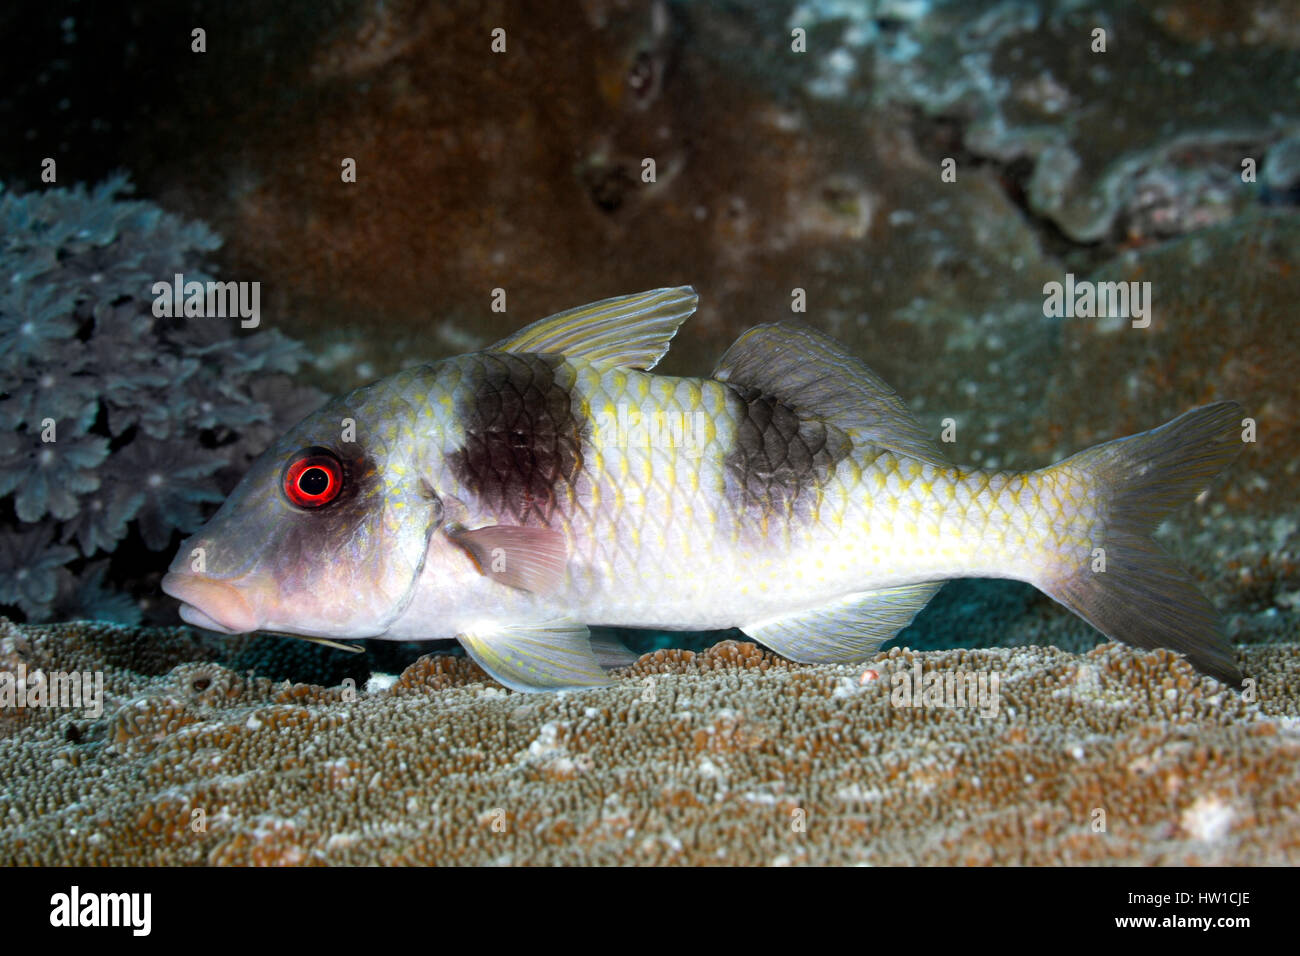 Doublebar or Two-Barred Goatfish, Parupeneus bifasciatus.This fish is resting on corals. Stock Photo